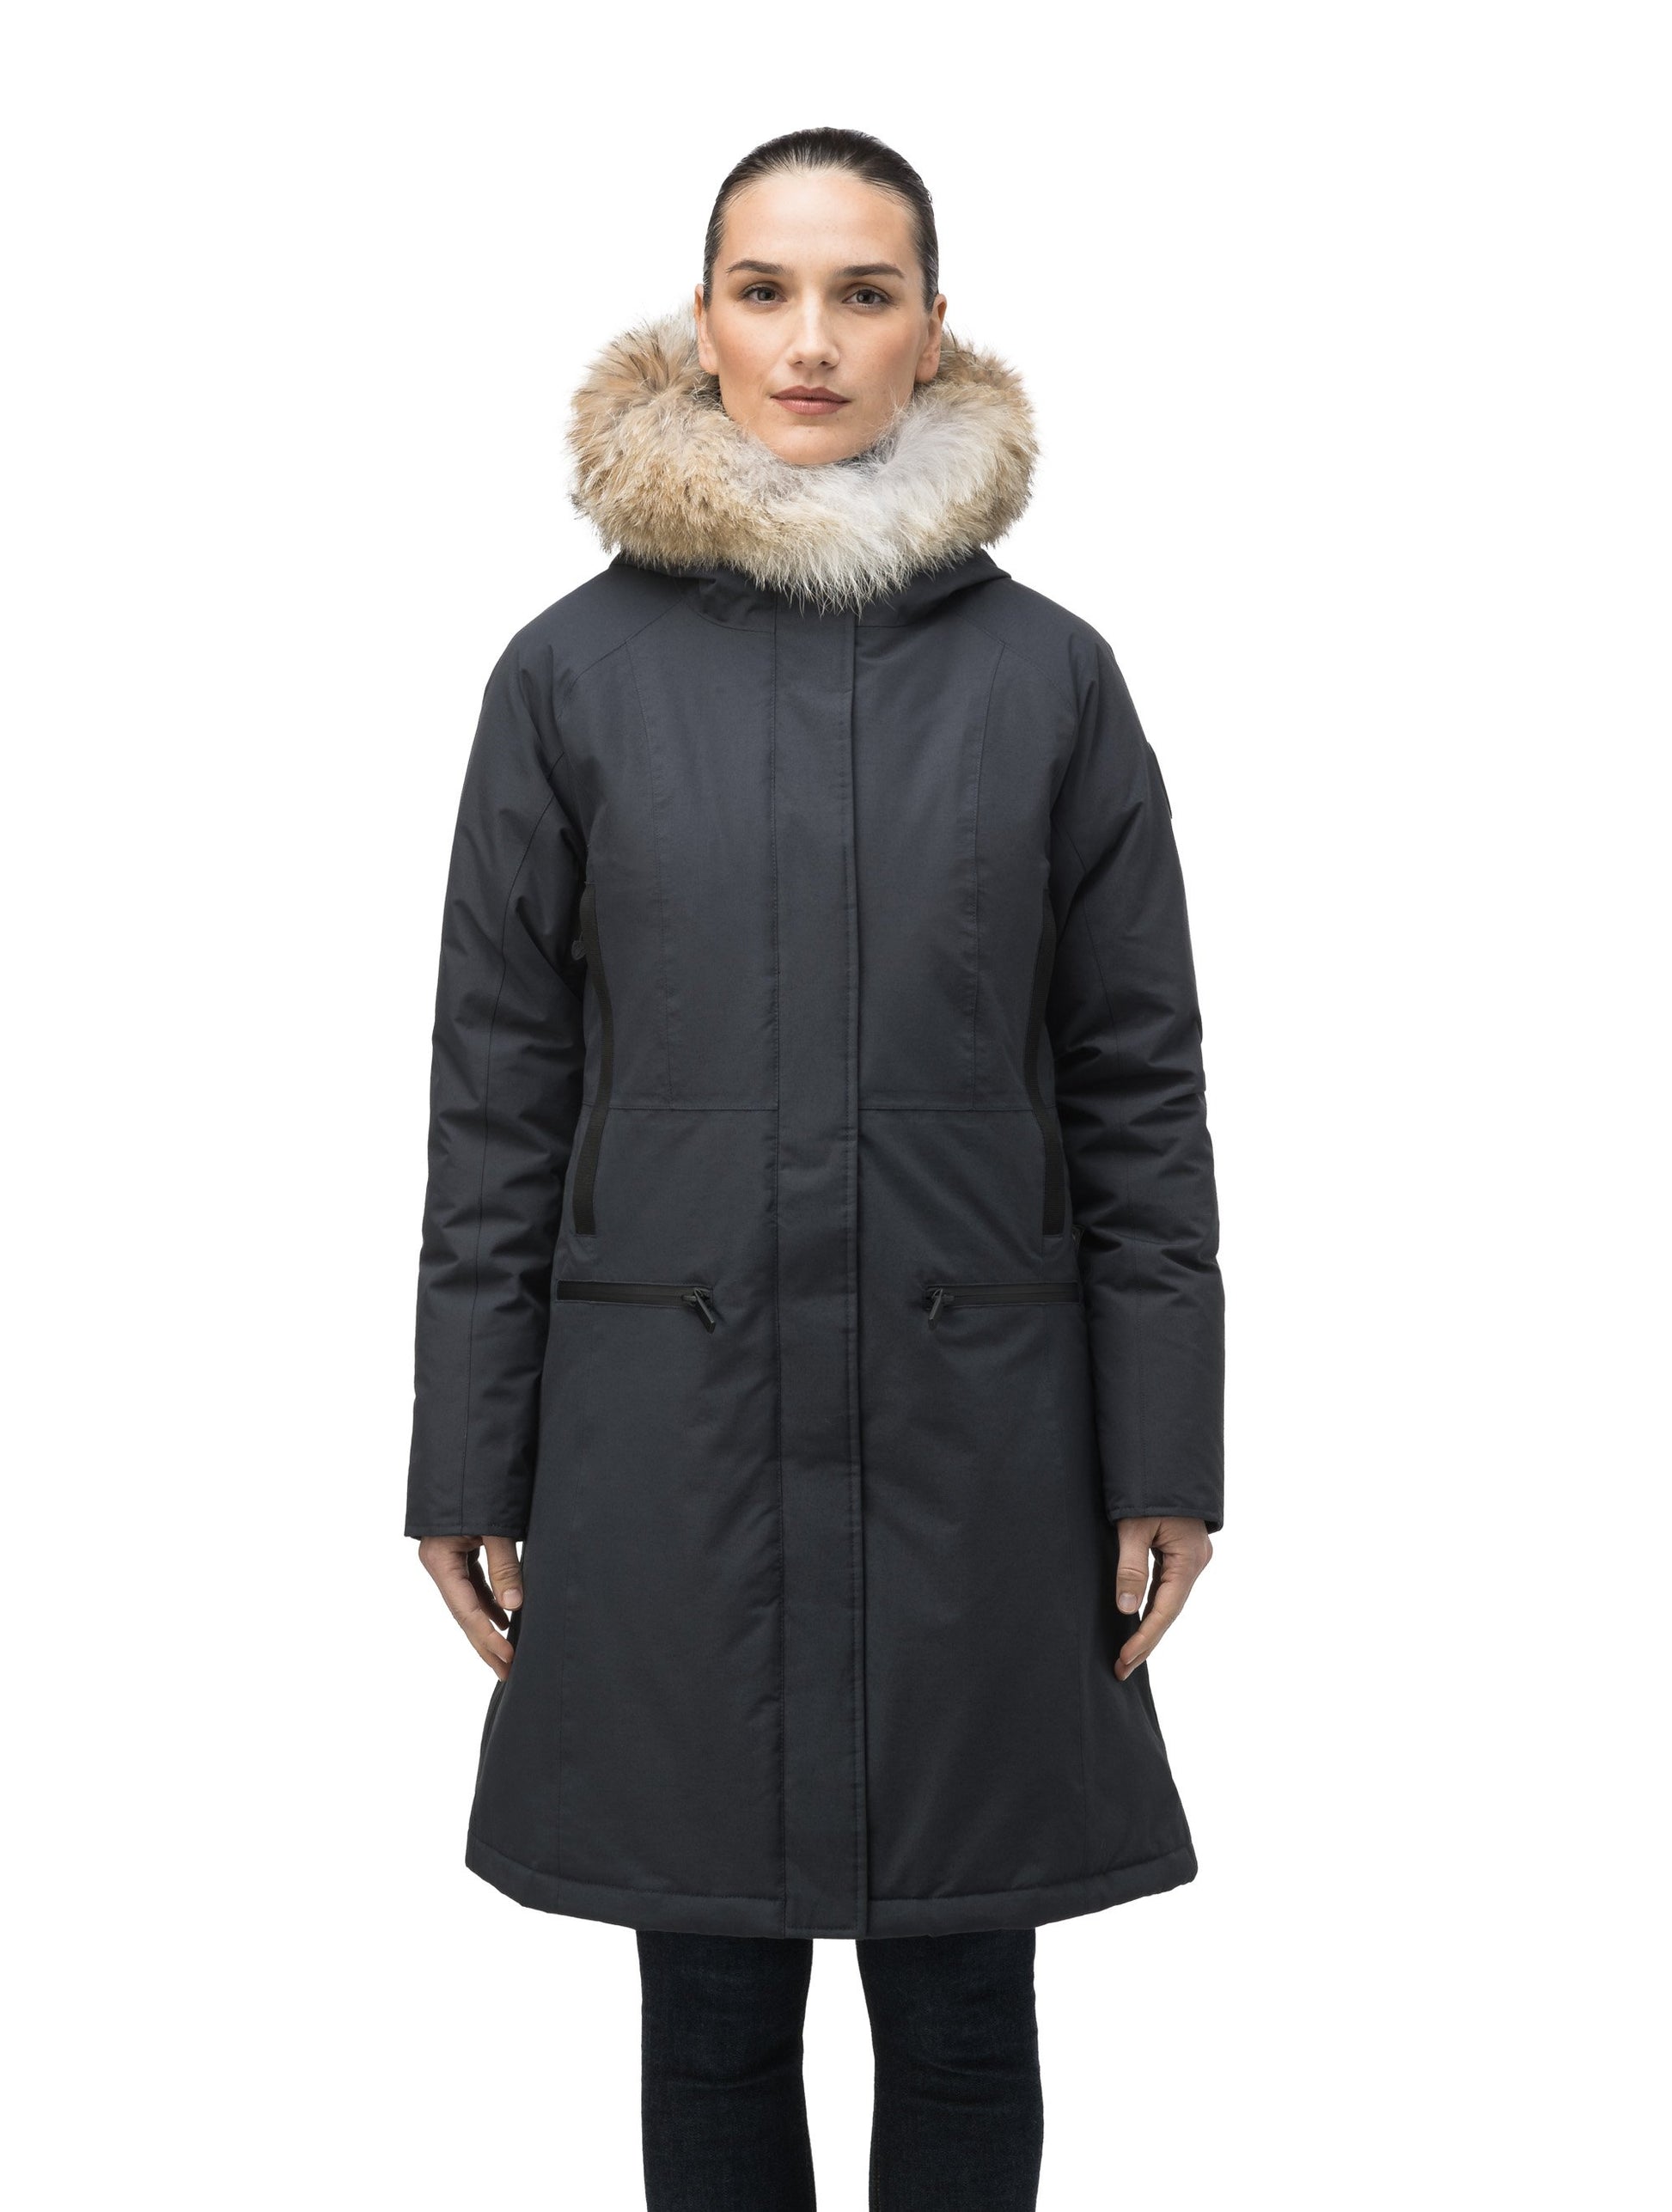 Knee length women's down filled parka with contrast ribbon accents and removable fur trim on the hood in Black